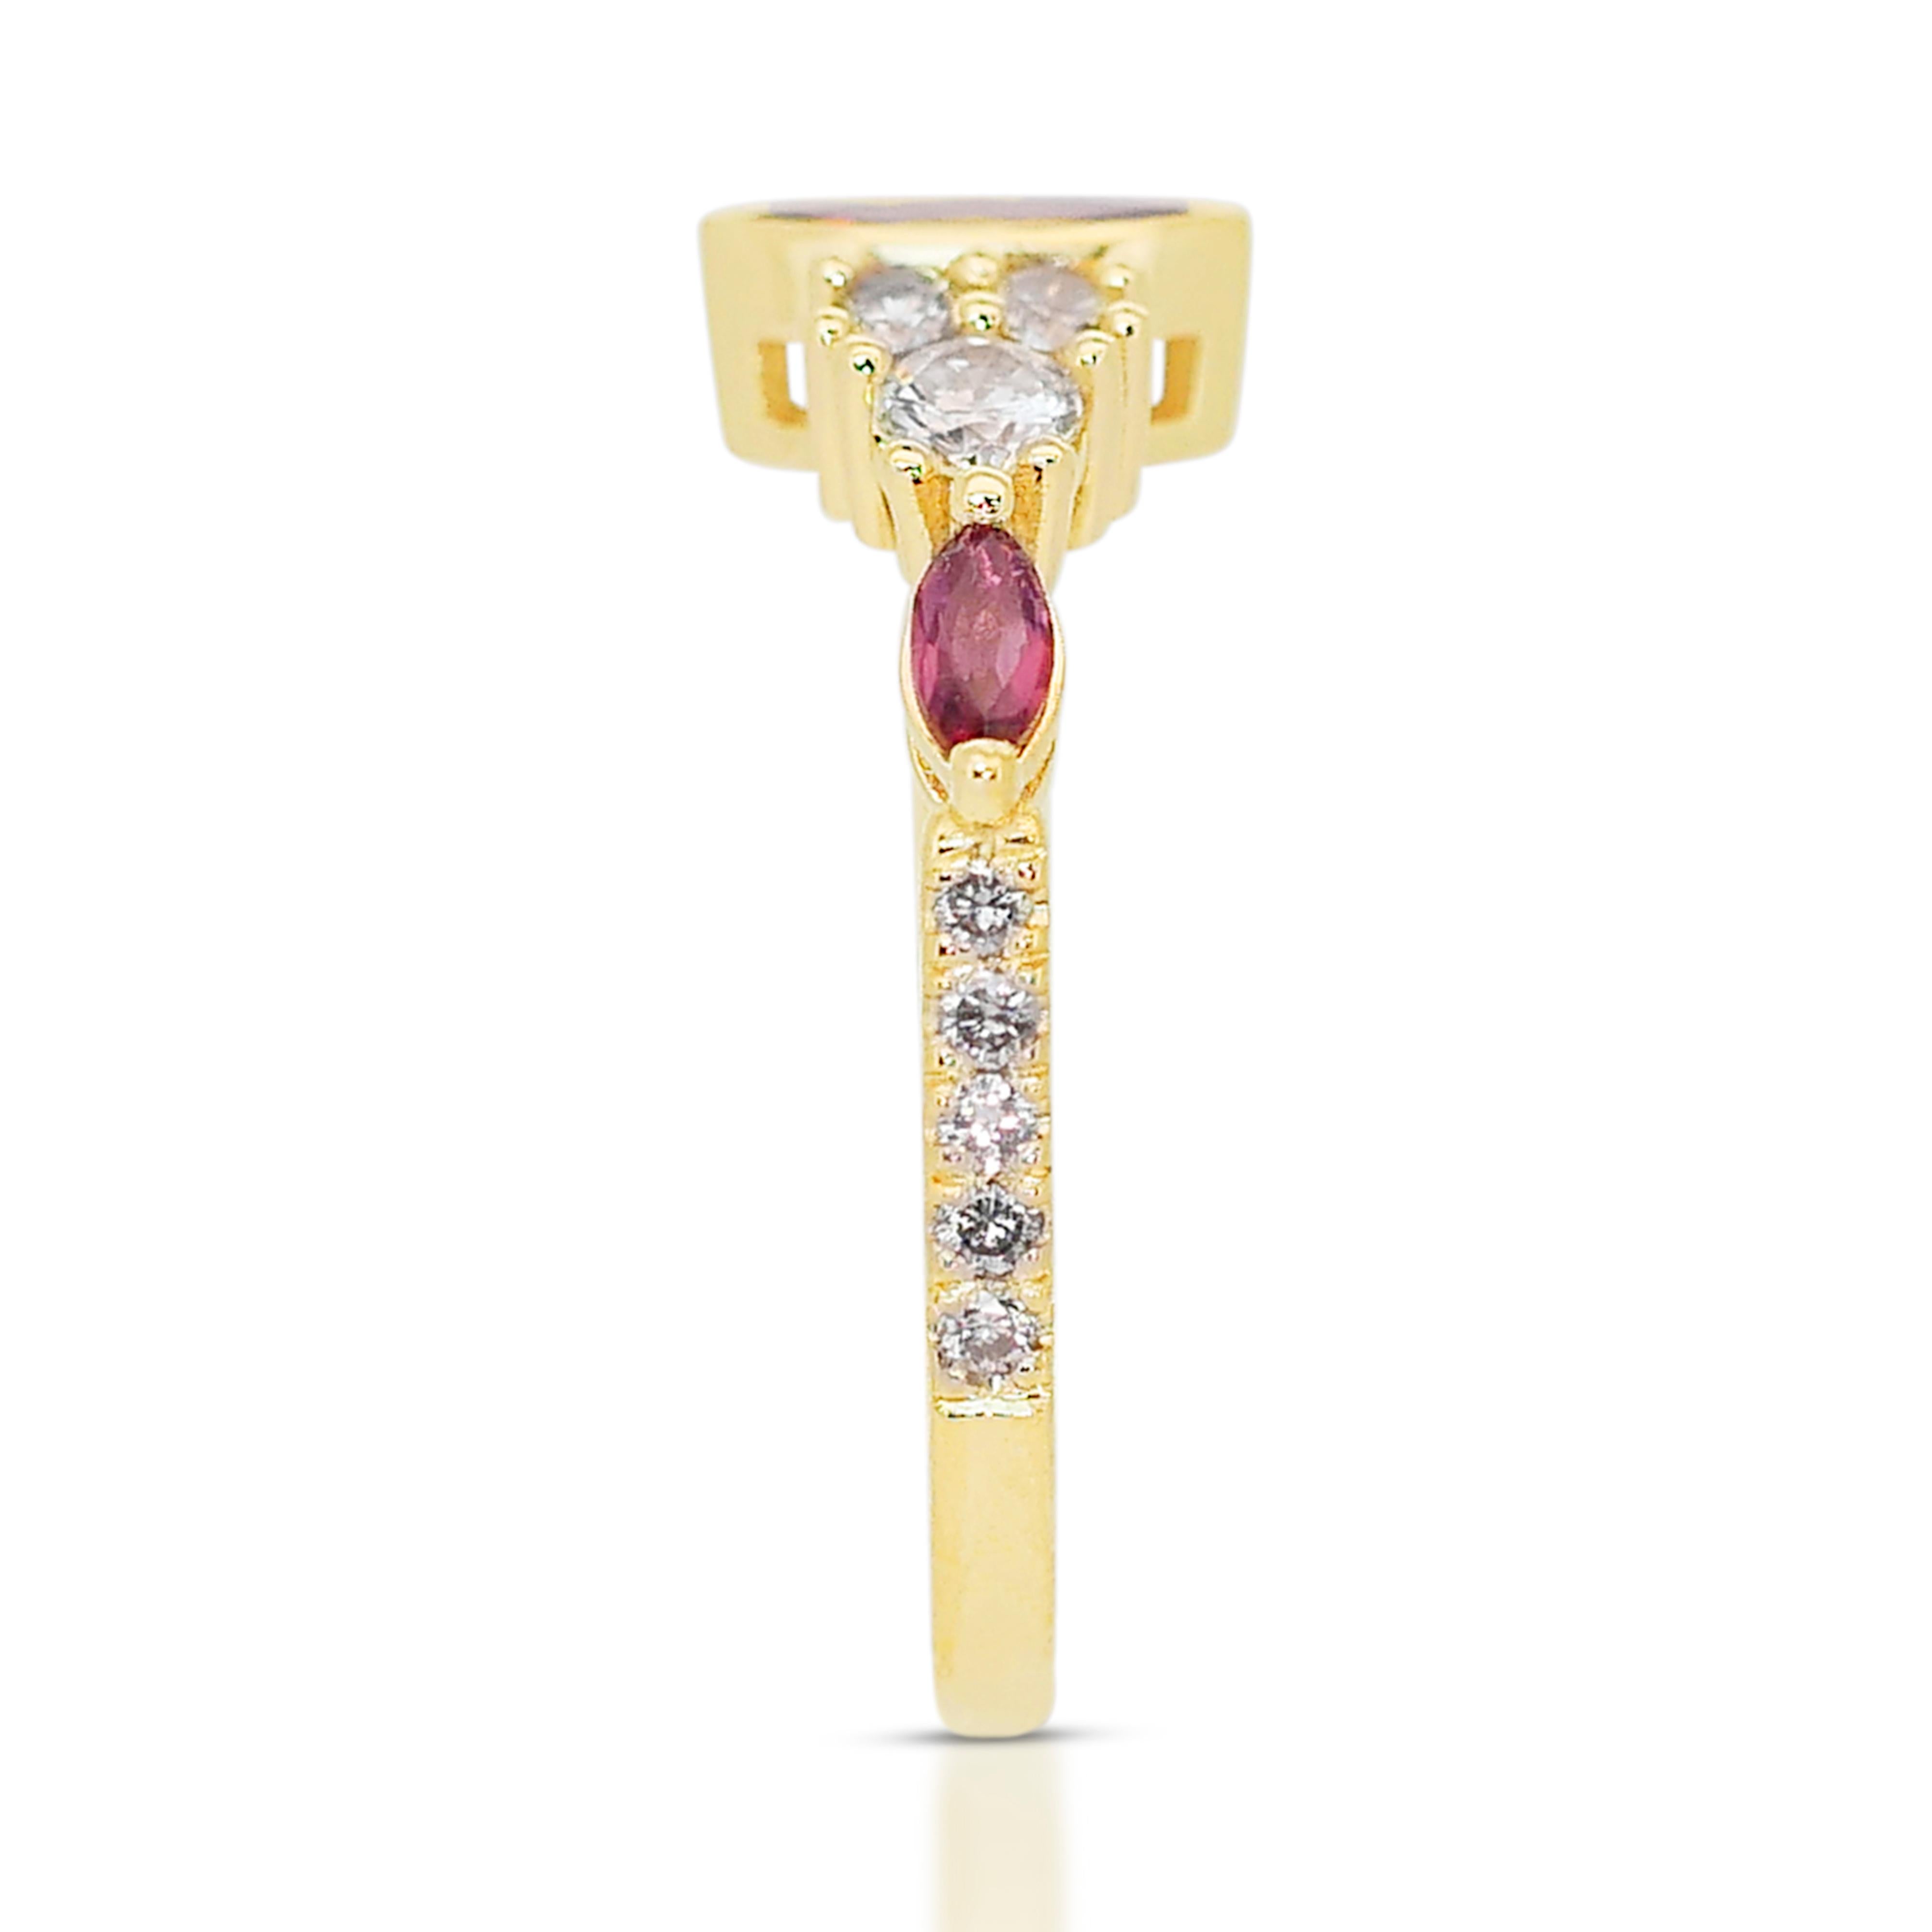 Fascinating 14k Yellow Gold Sapphire & Diamond Pave Ring w/1.02 ct-IGI Certified For Sale 2